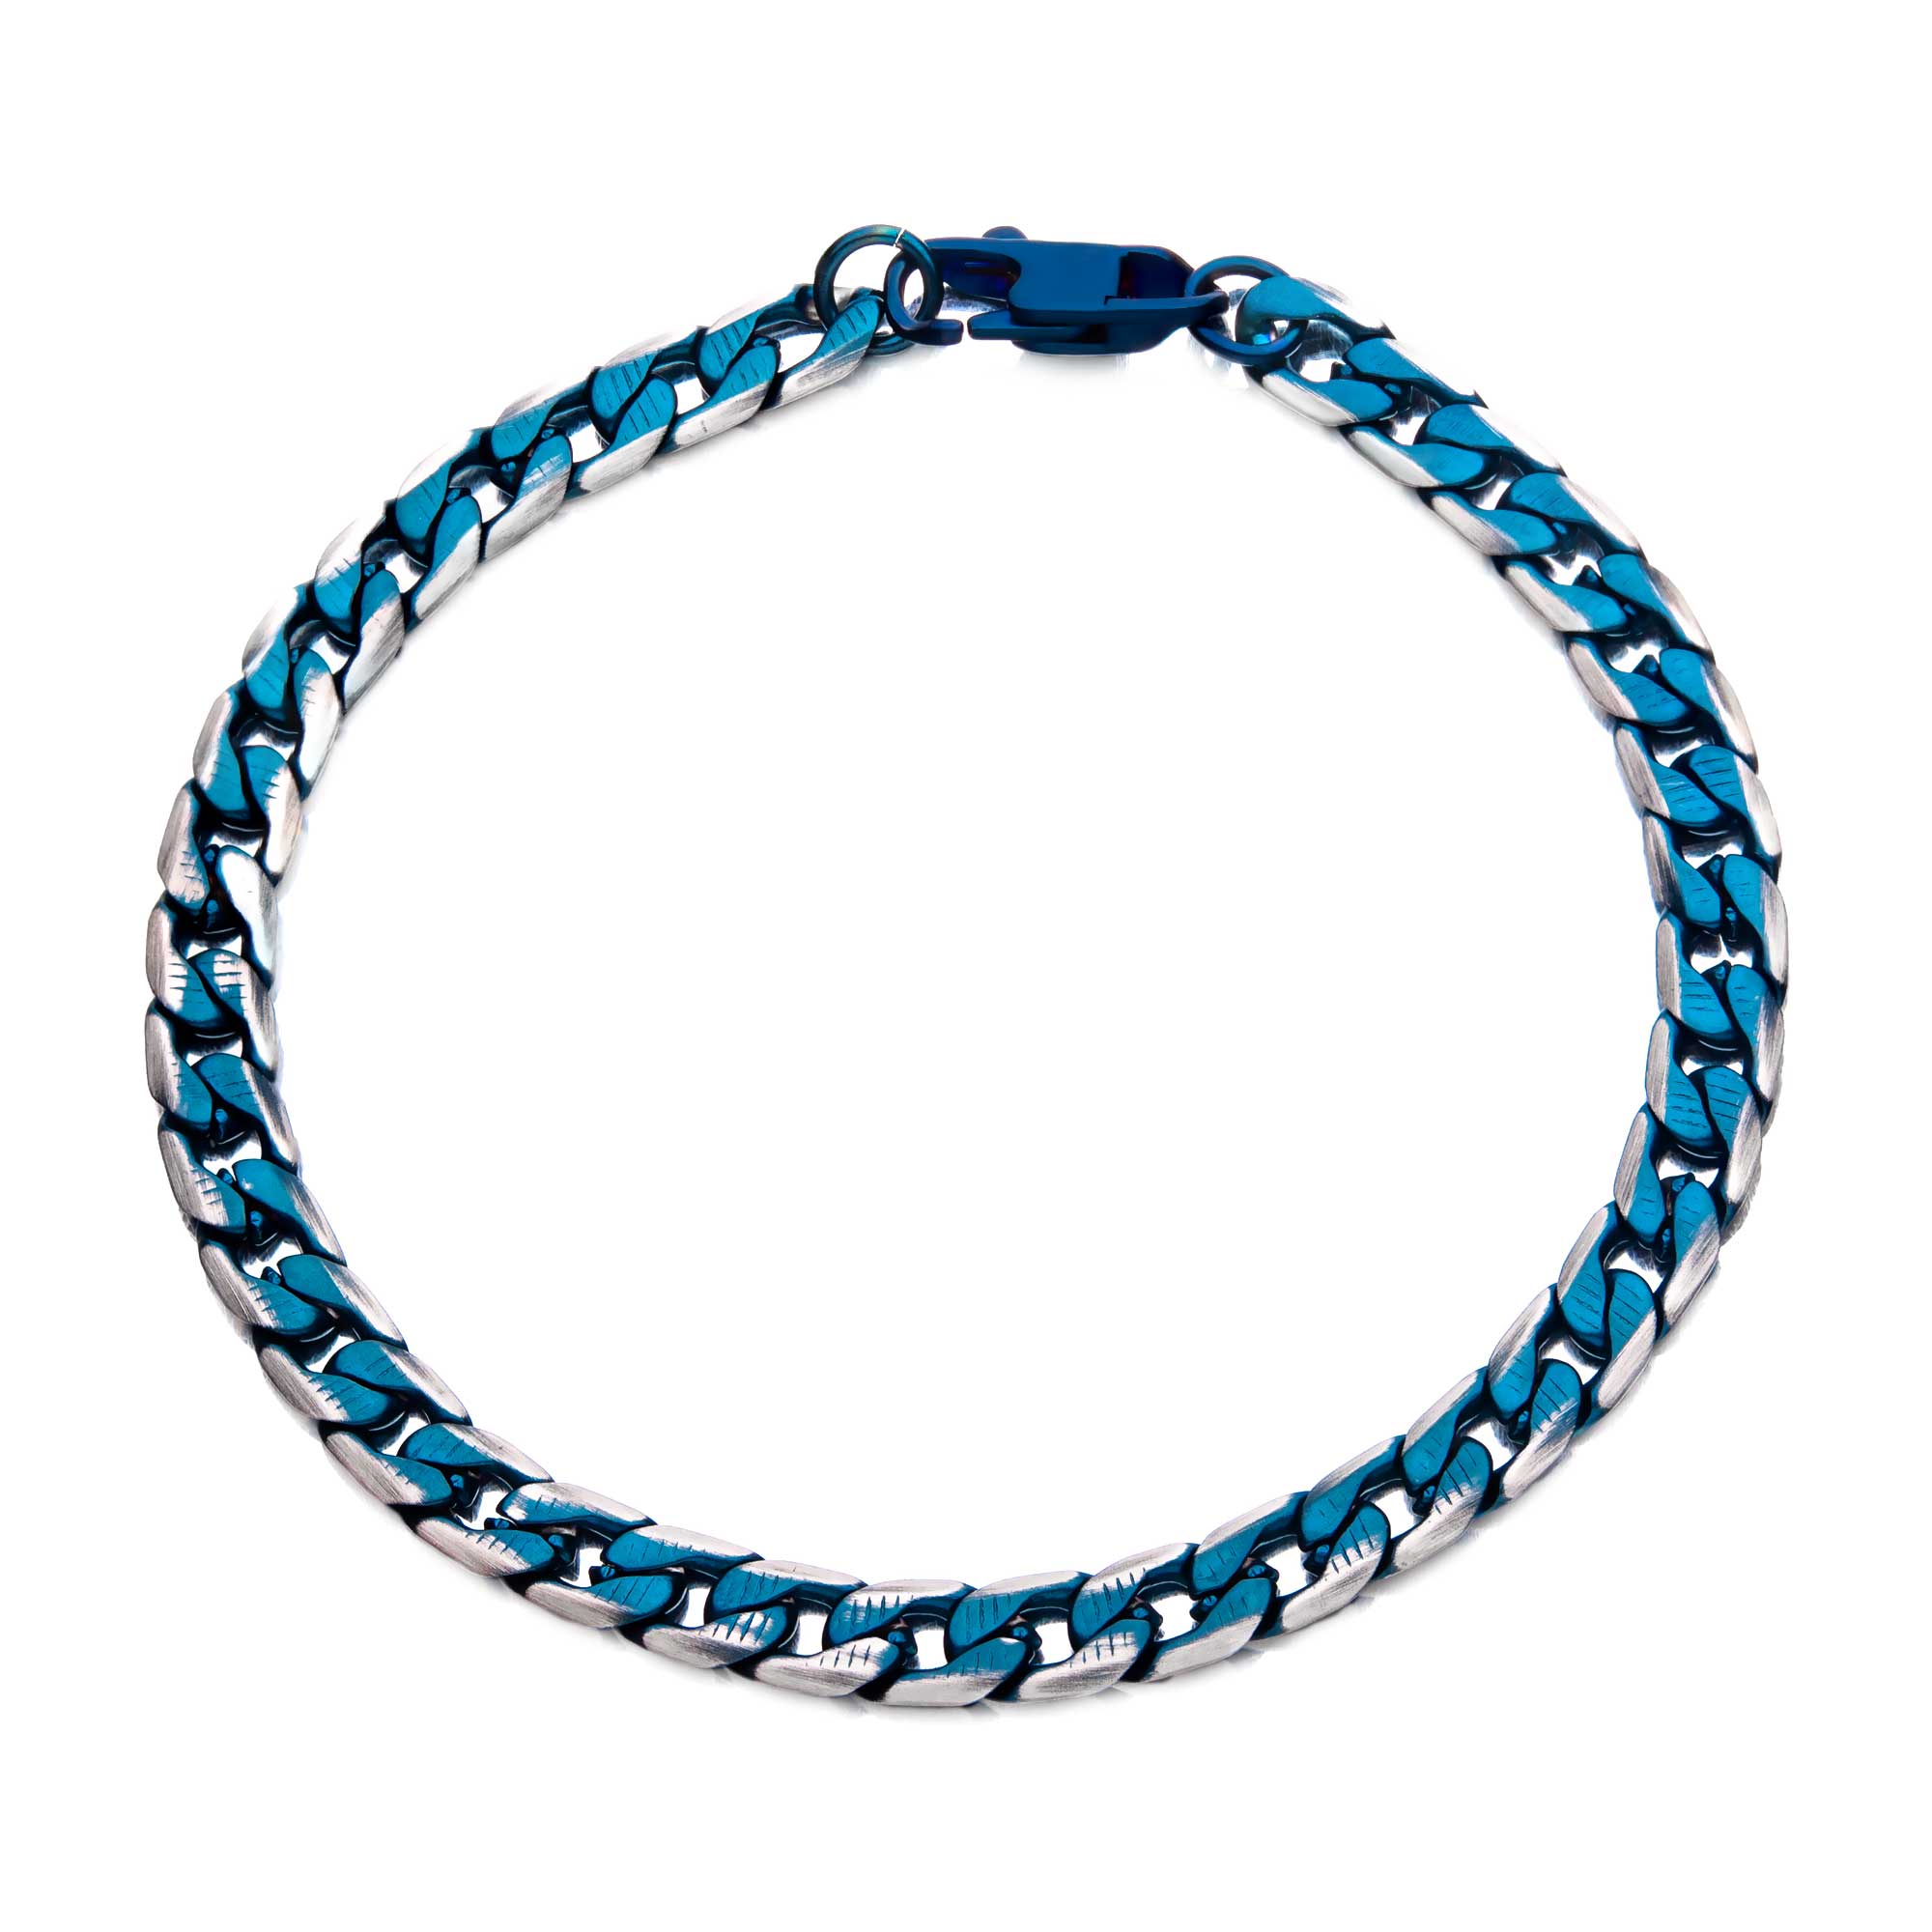 Stainless Steel Blue Plated Curb Cuban Chain with Lobster Clasp Image 2 K. Martin Jeweler Dodge City, KS